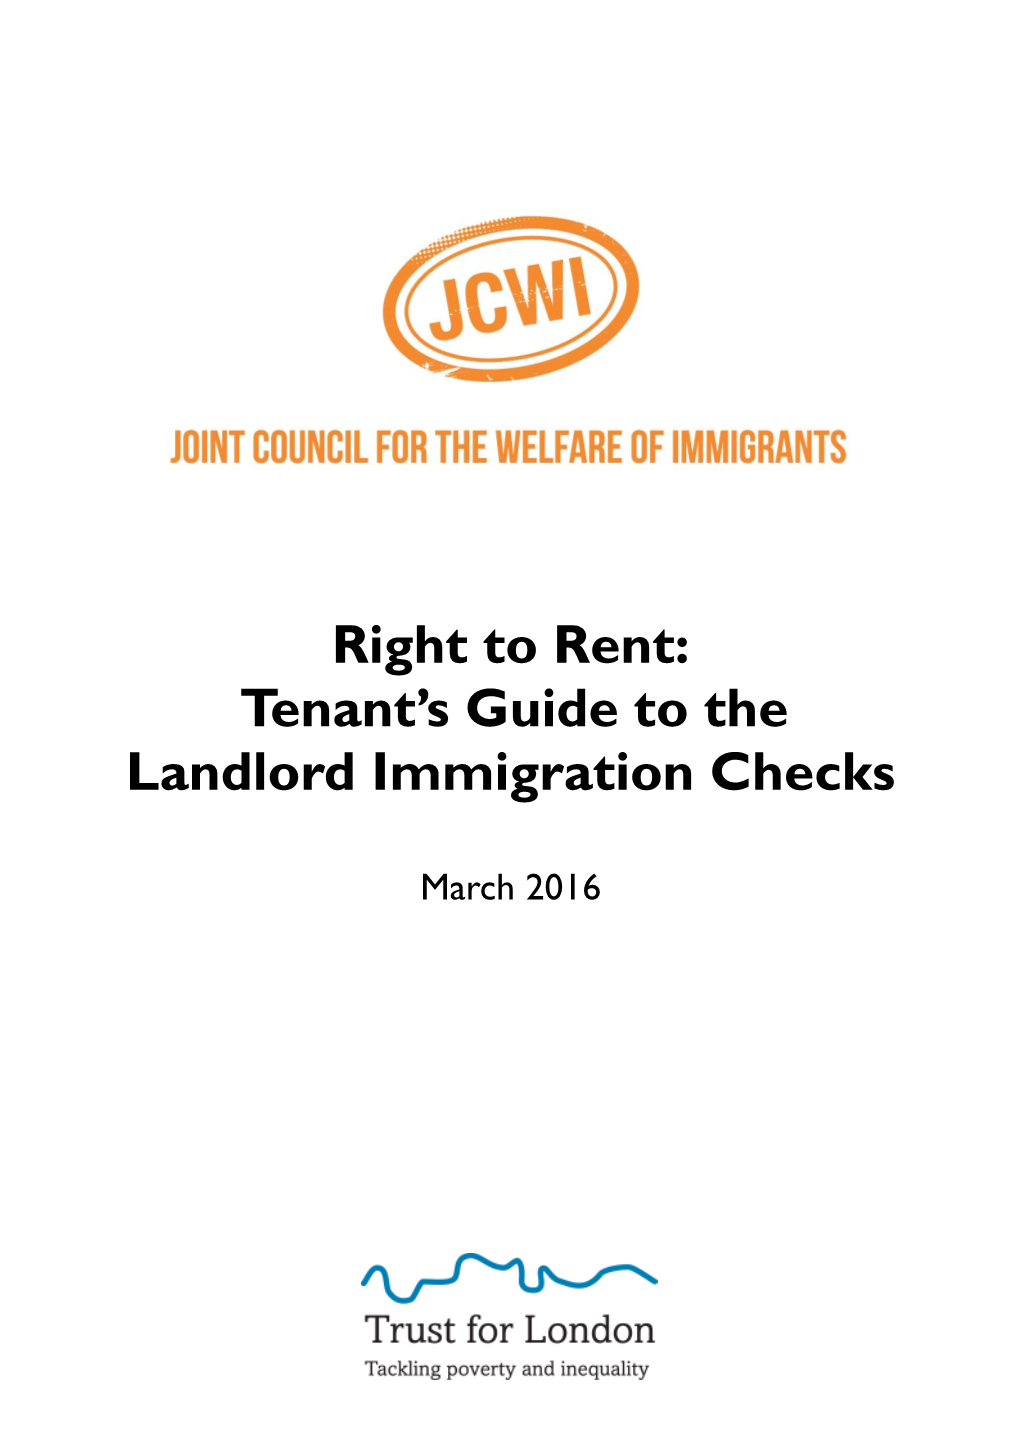 Right to Rent: Tenant's Guide to the Landlord Immigration Checks